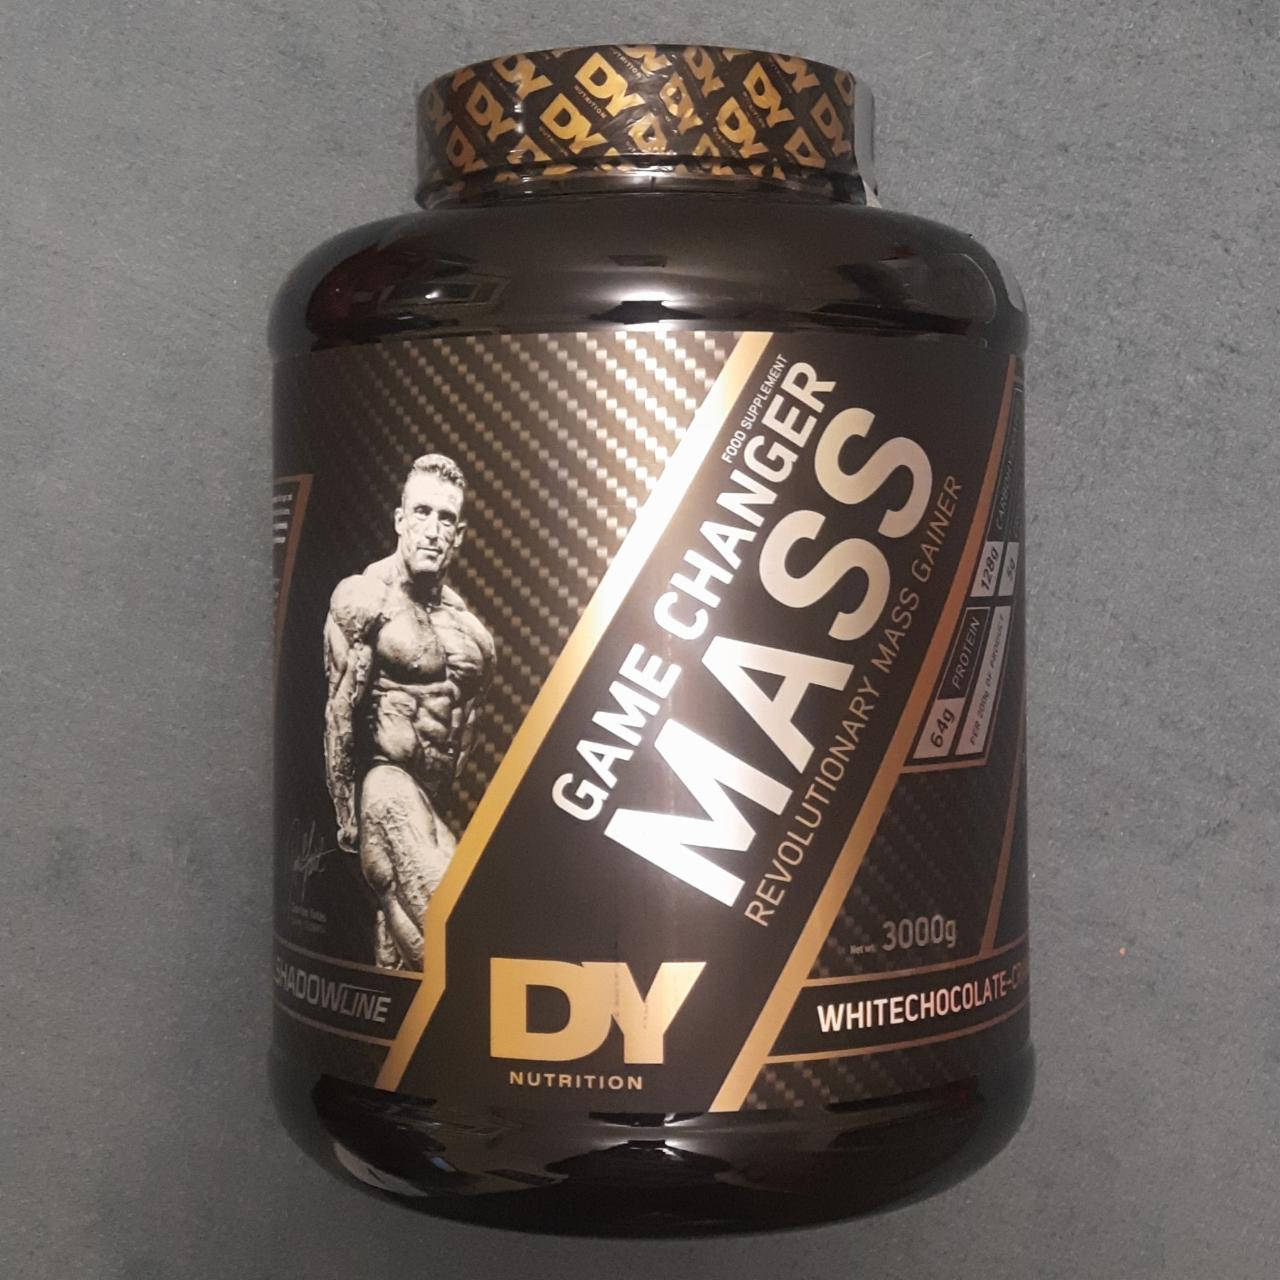 Фото - Game changer Mass whitechocolare-cranberry DY Nutrition